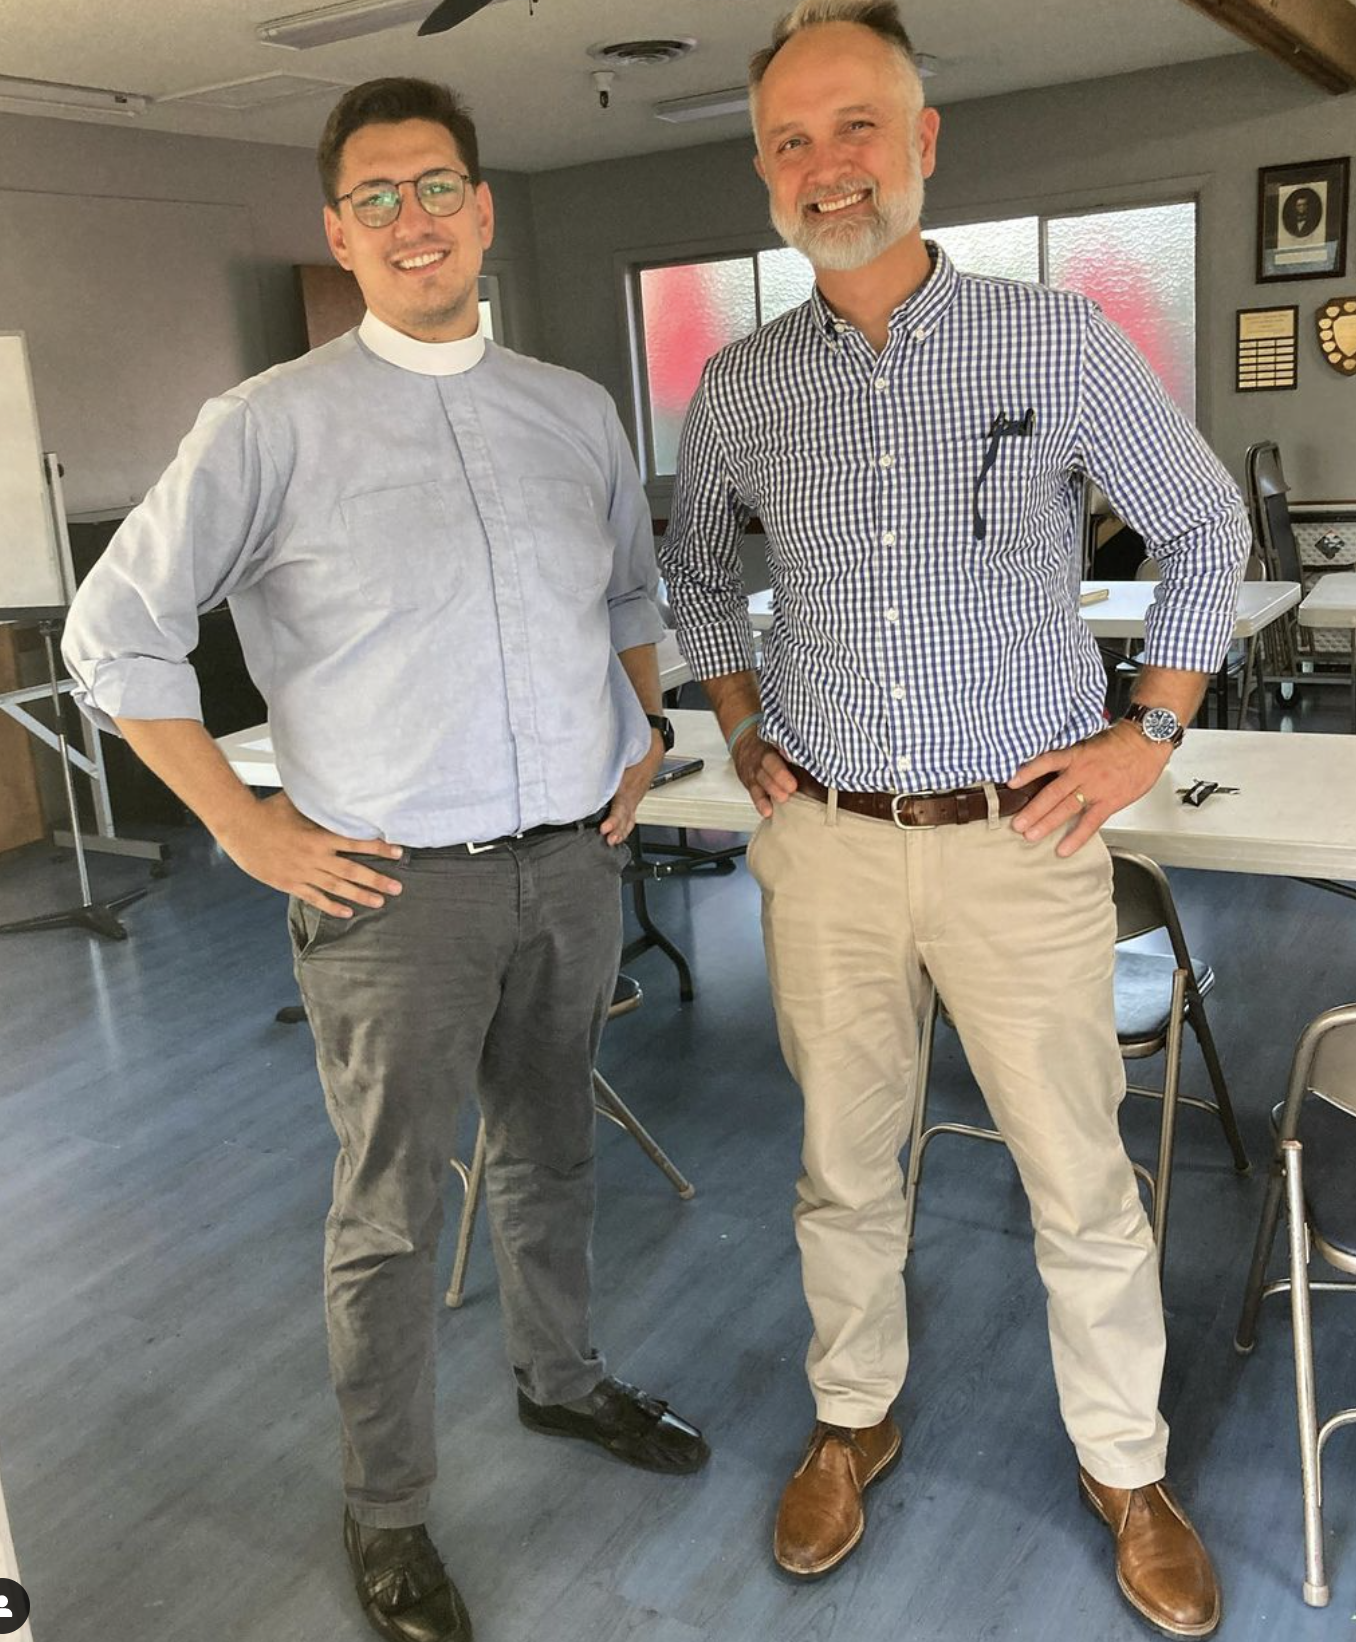 A visit from Canterbury alumnus Dr. Derek Halvorson, who currently serves as Covenant College’s sixth president. Our founder Rev. Norm Milbank was his grandfather.